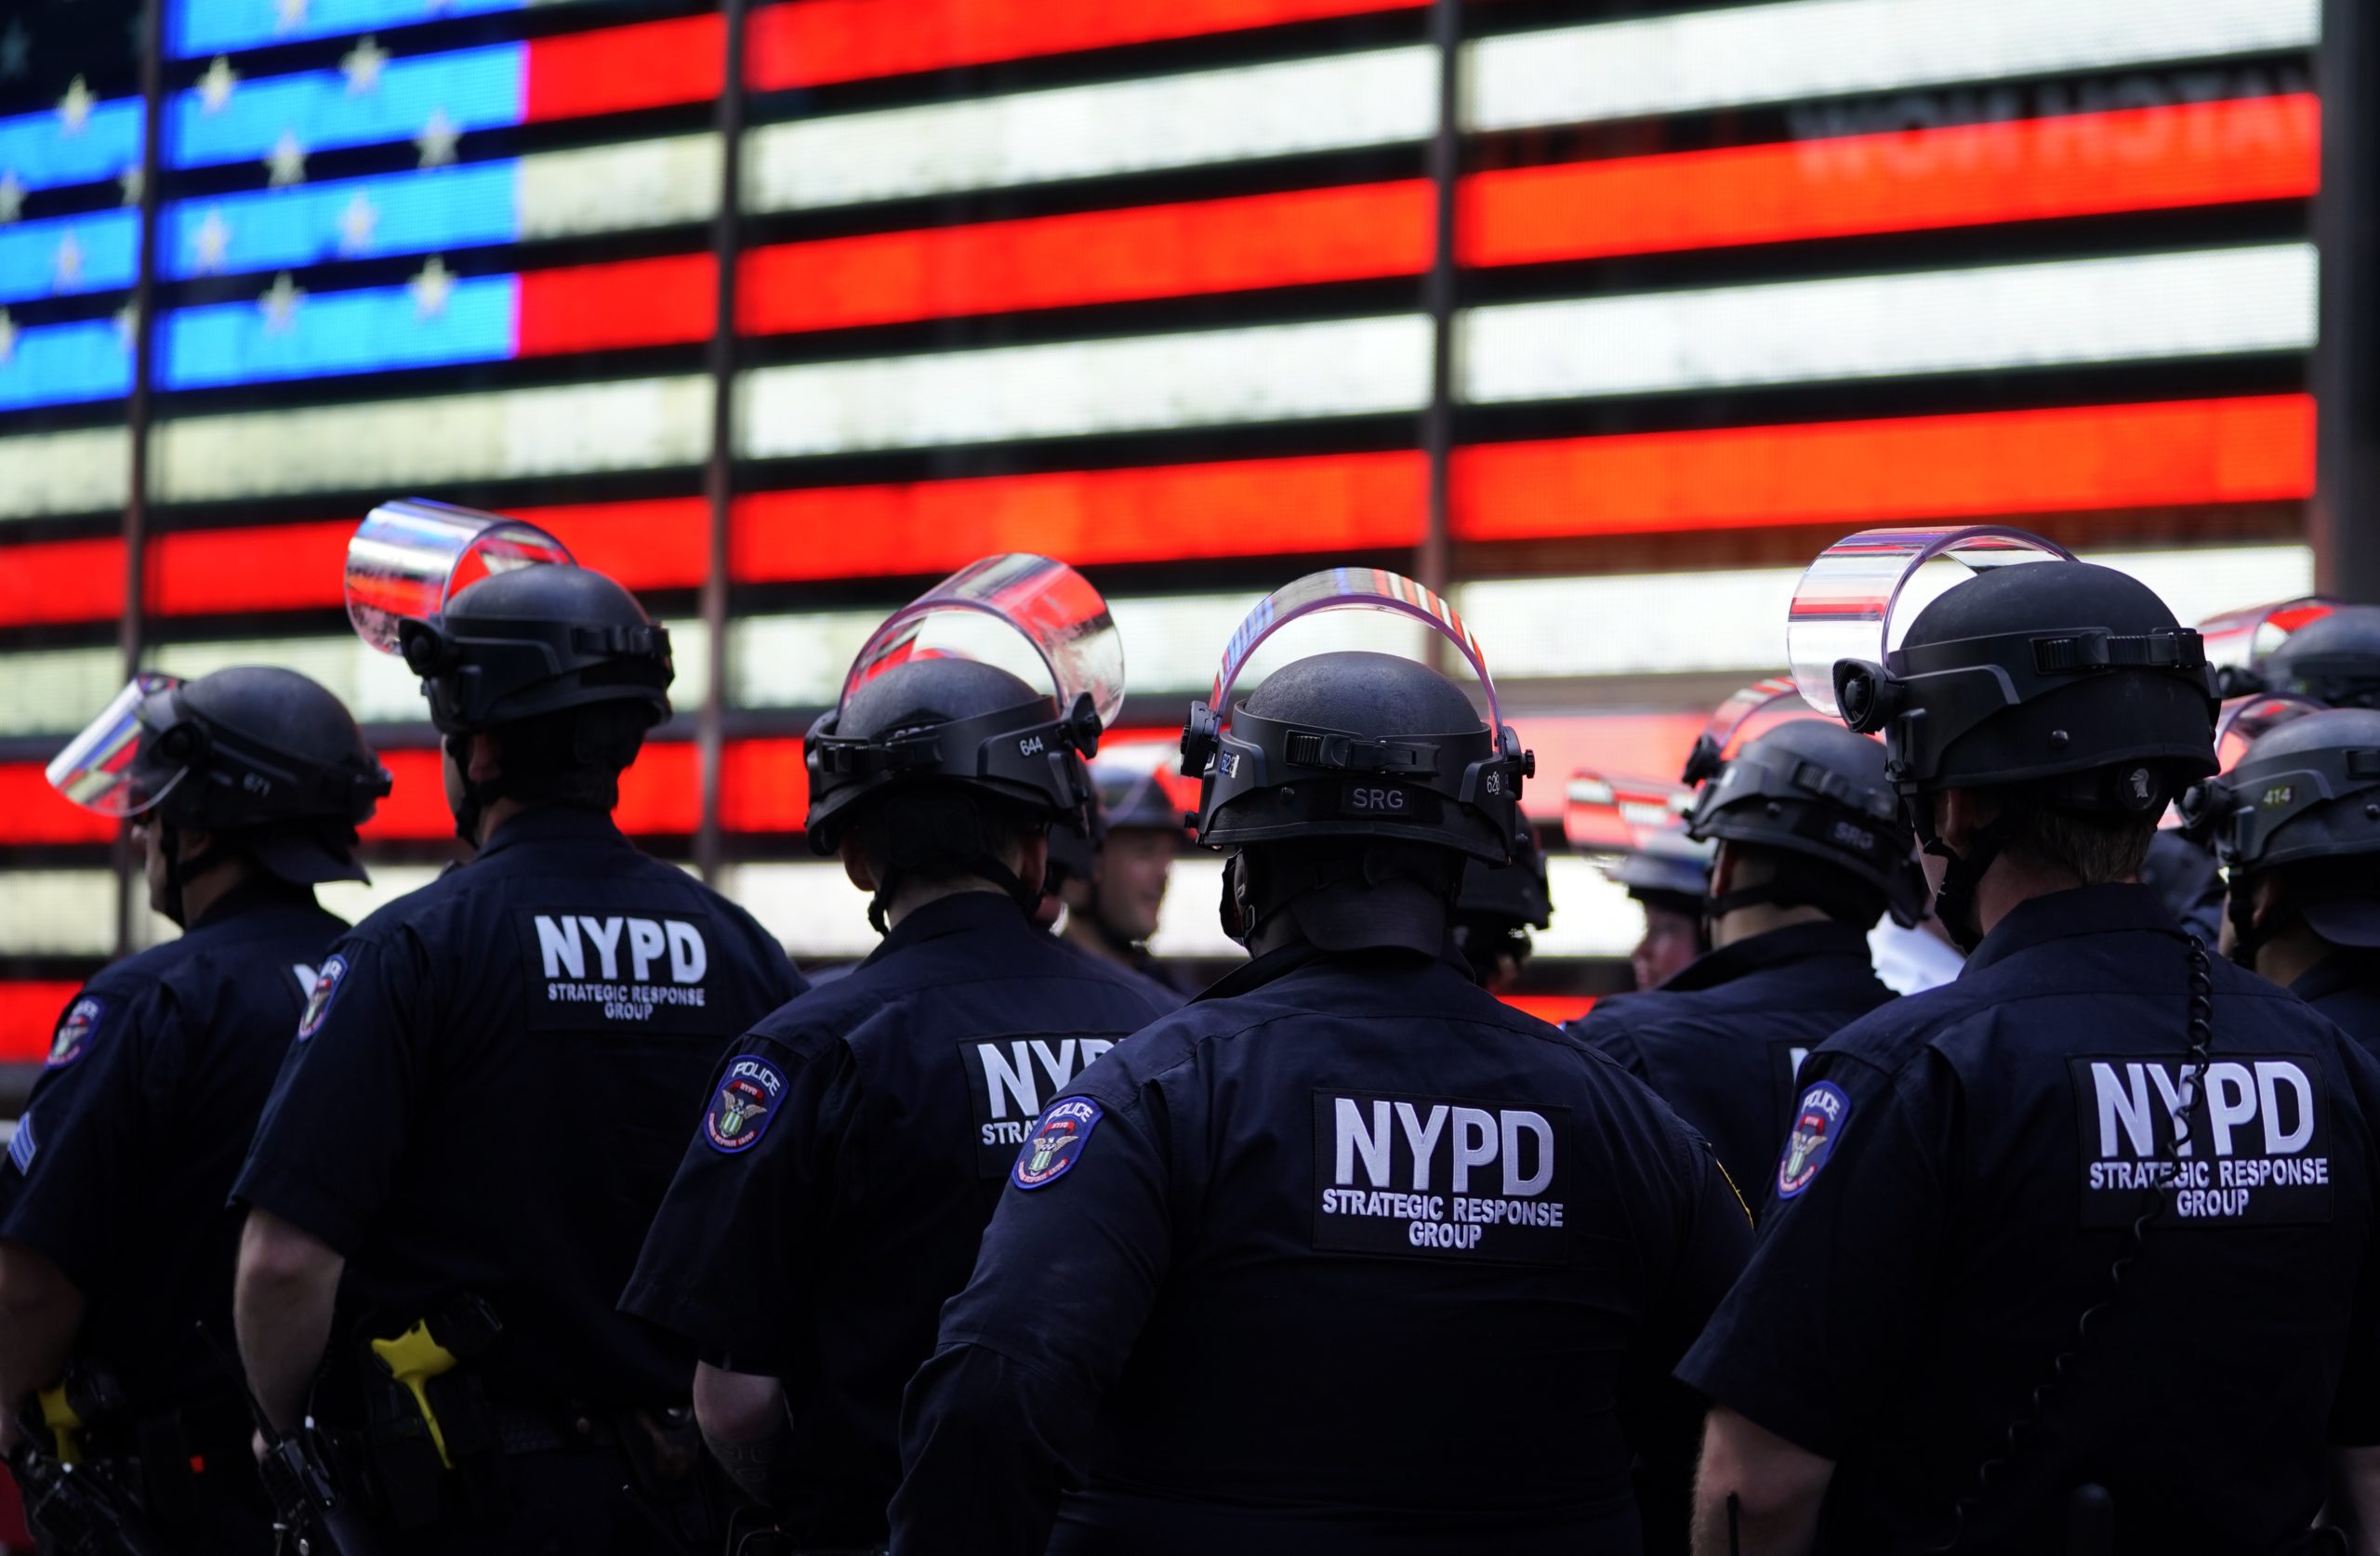 TOPSHOT - NYPD police officers watch demonstrators in Times Square on June 1, 2020, during a "Black Lives Matter" protest. - New York's mayor Bill de Blasio today declared a city curfew from 11:00 pm to 5:00 am, as sometimes violent anti-racism protests roil communities nationwide. Saying that "we support peaceful protest," De Blasio tweeted he had made the decision in consultation with the state's governor Andrew Cuomo, following the lead of many large US cities that instituted curfews in a bid to clamp down on violence and looting. (Photo by TIMOTHY A. CLARY / AFP) (Photo by TIMOTHY A. CLARY/AFP via Getty Images)